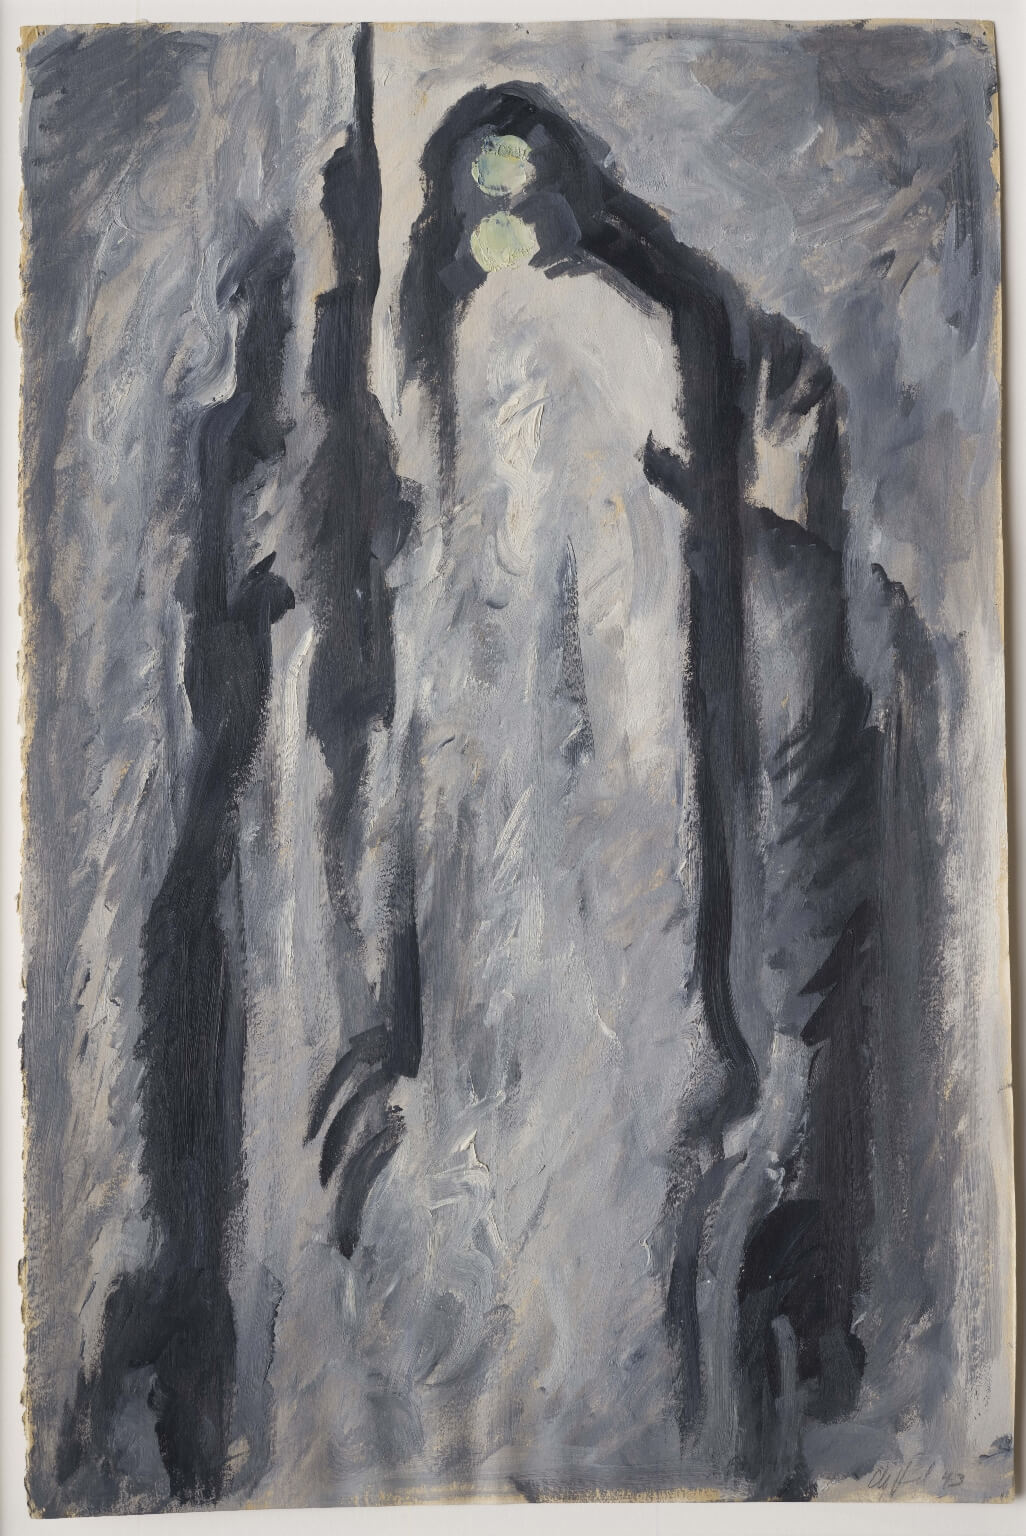 Abstract oil painting on paper with shades of gray and eerie, ghostly black figures